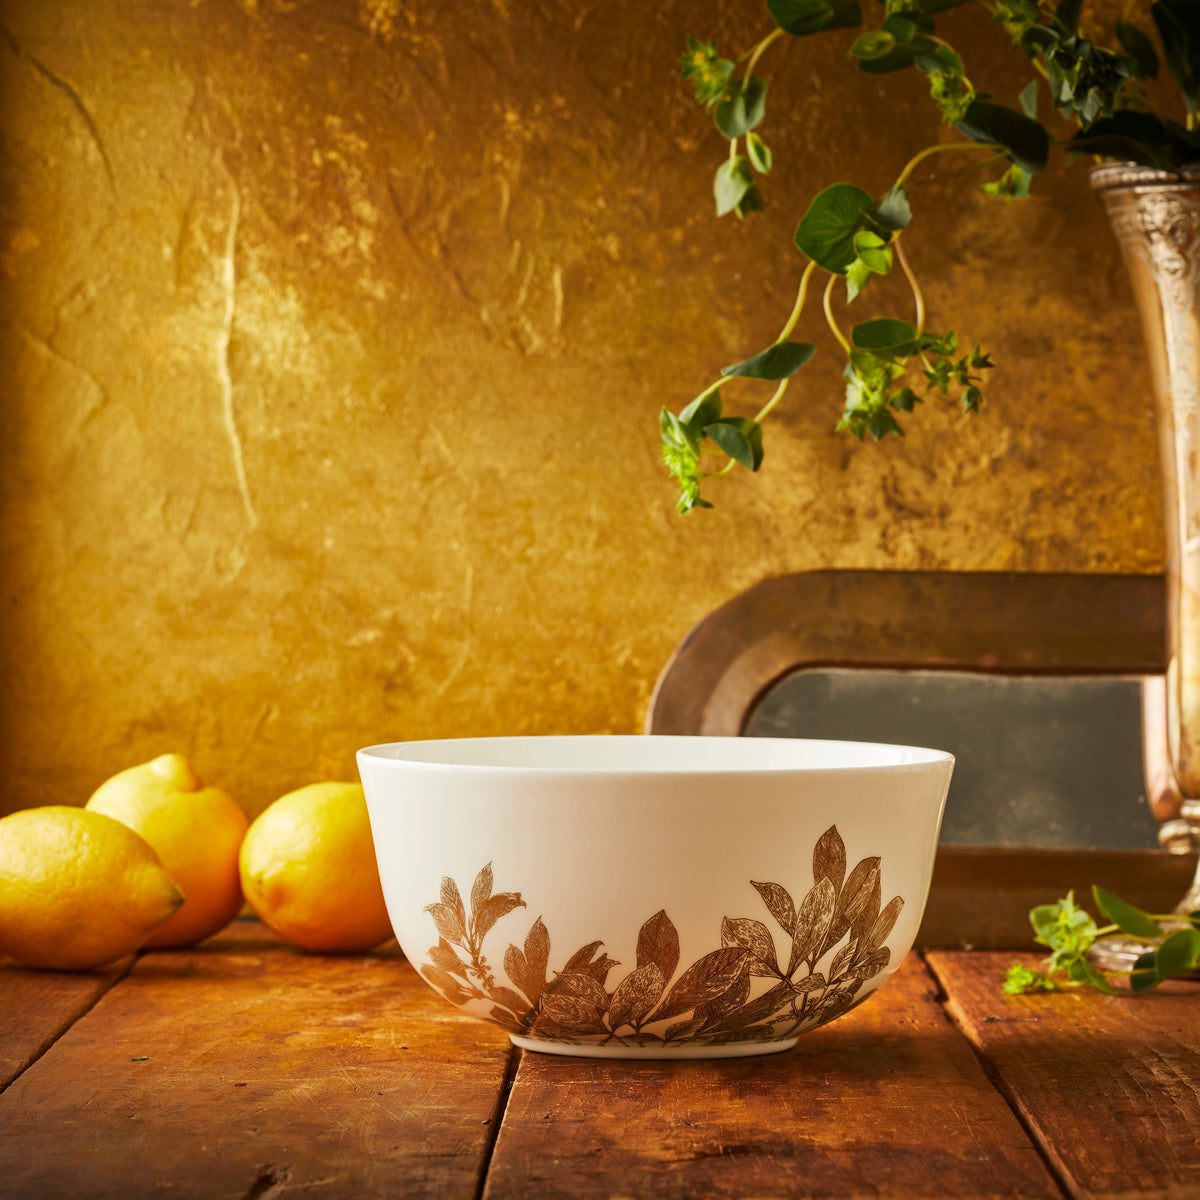 A Gold Arbor Medium Serving Bowl sitting on a table next to lemons.